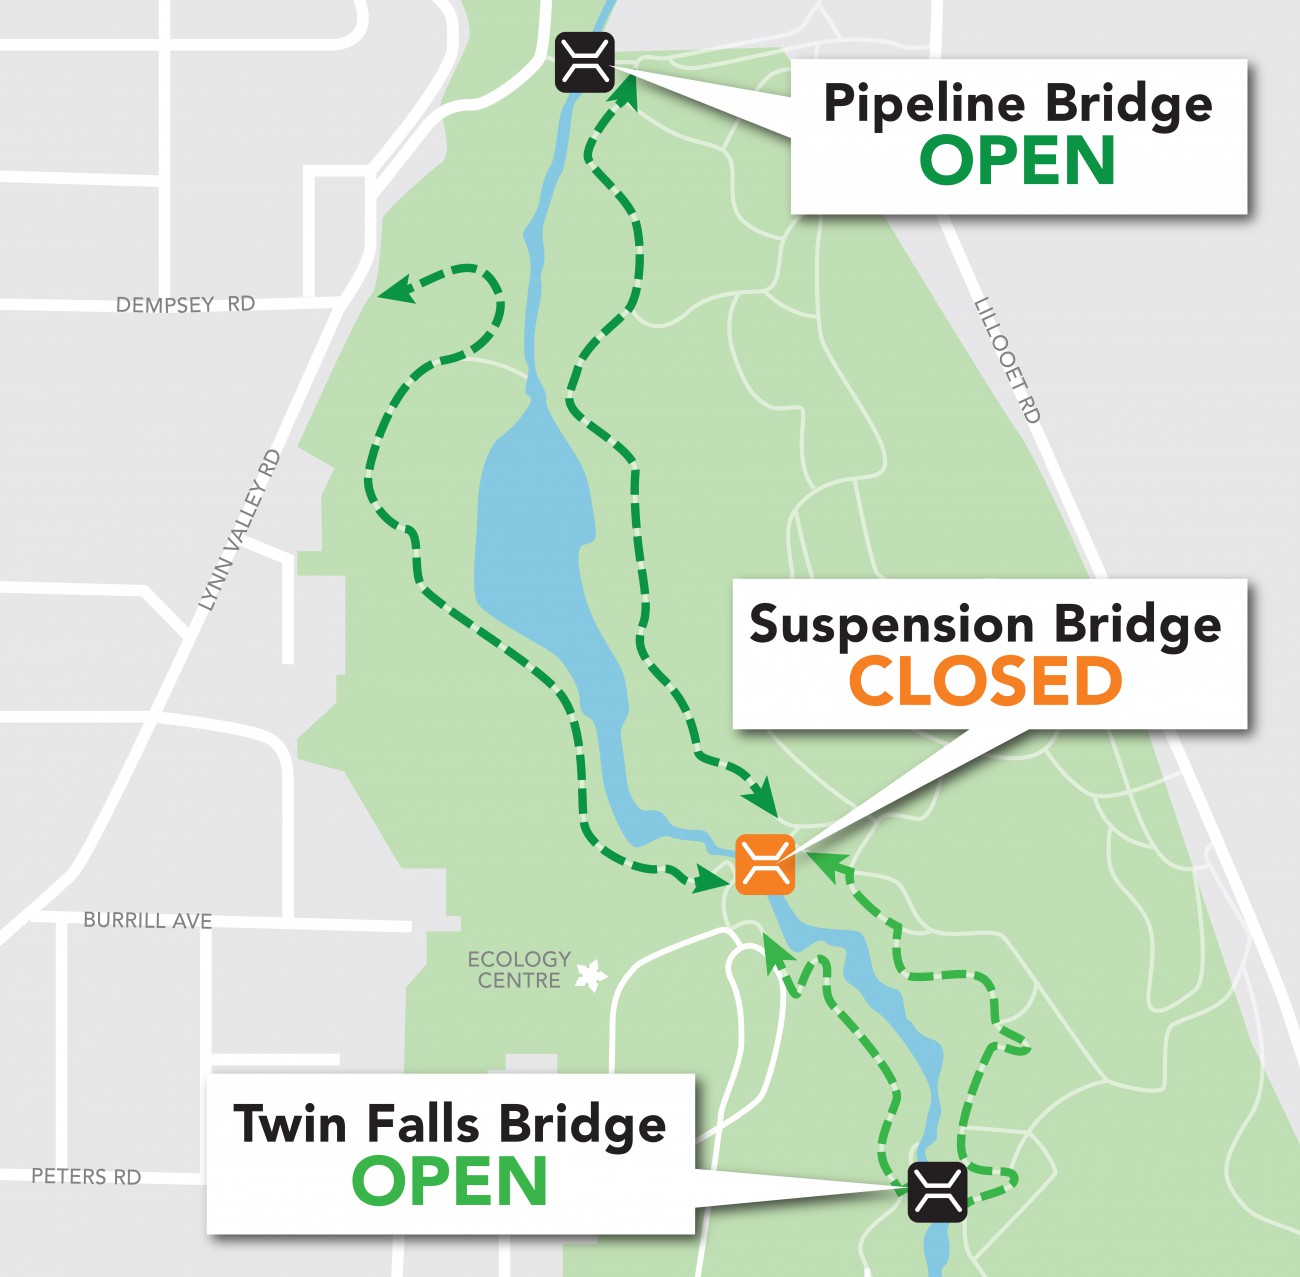 A map of Lynn Canyon indicating that the Suspension Bridge is closed, while the Pipeline Bridge and Twin Falls Bridge remain open.